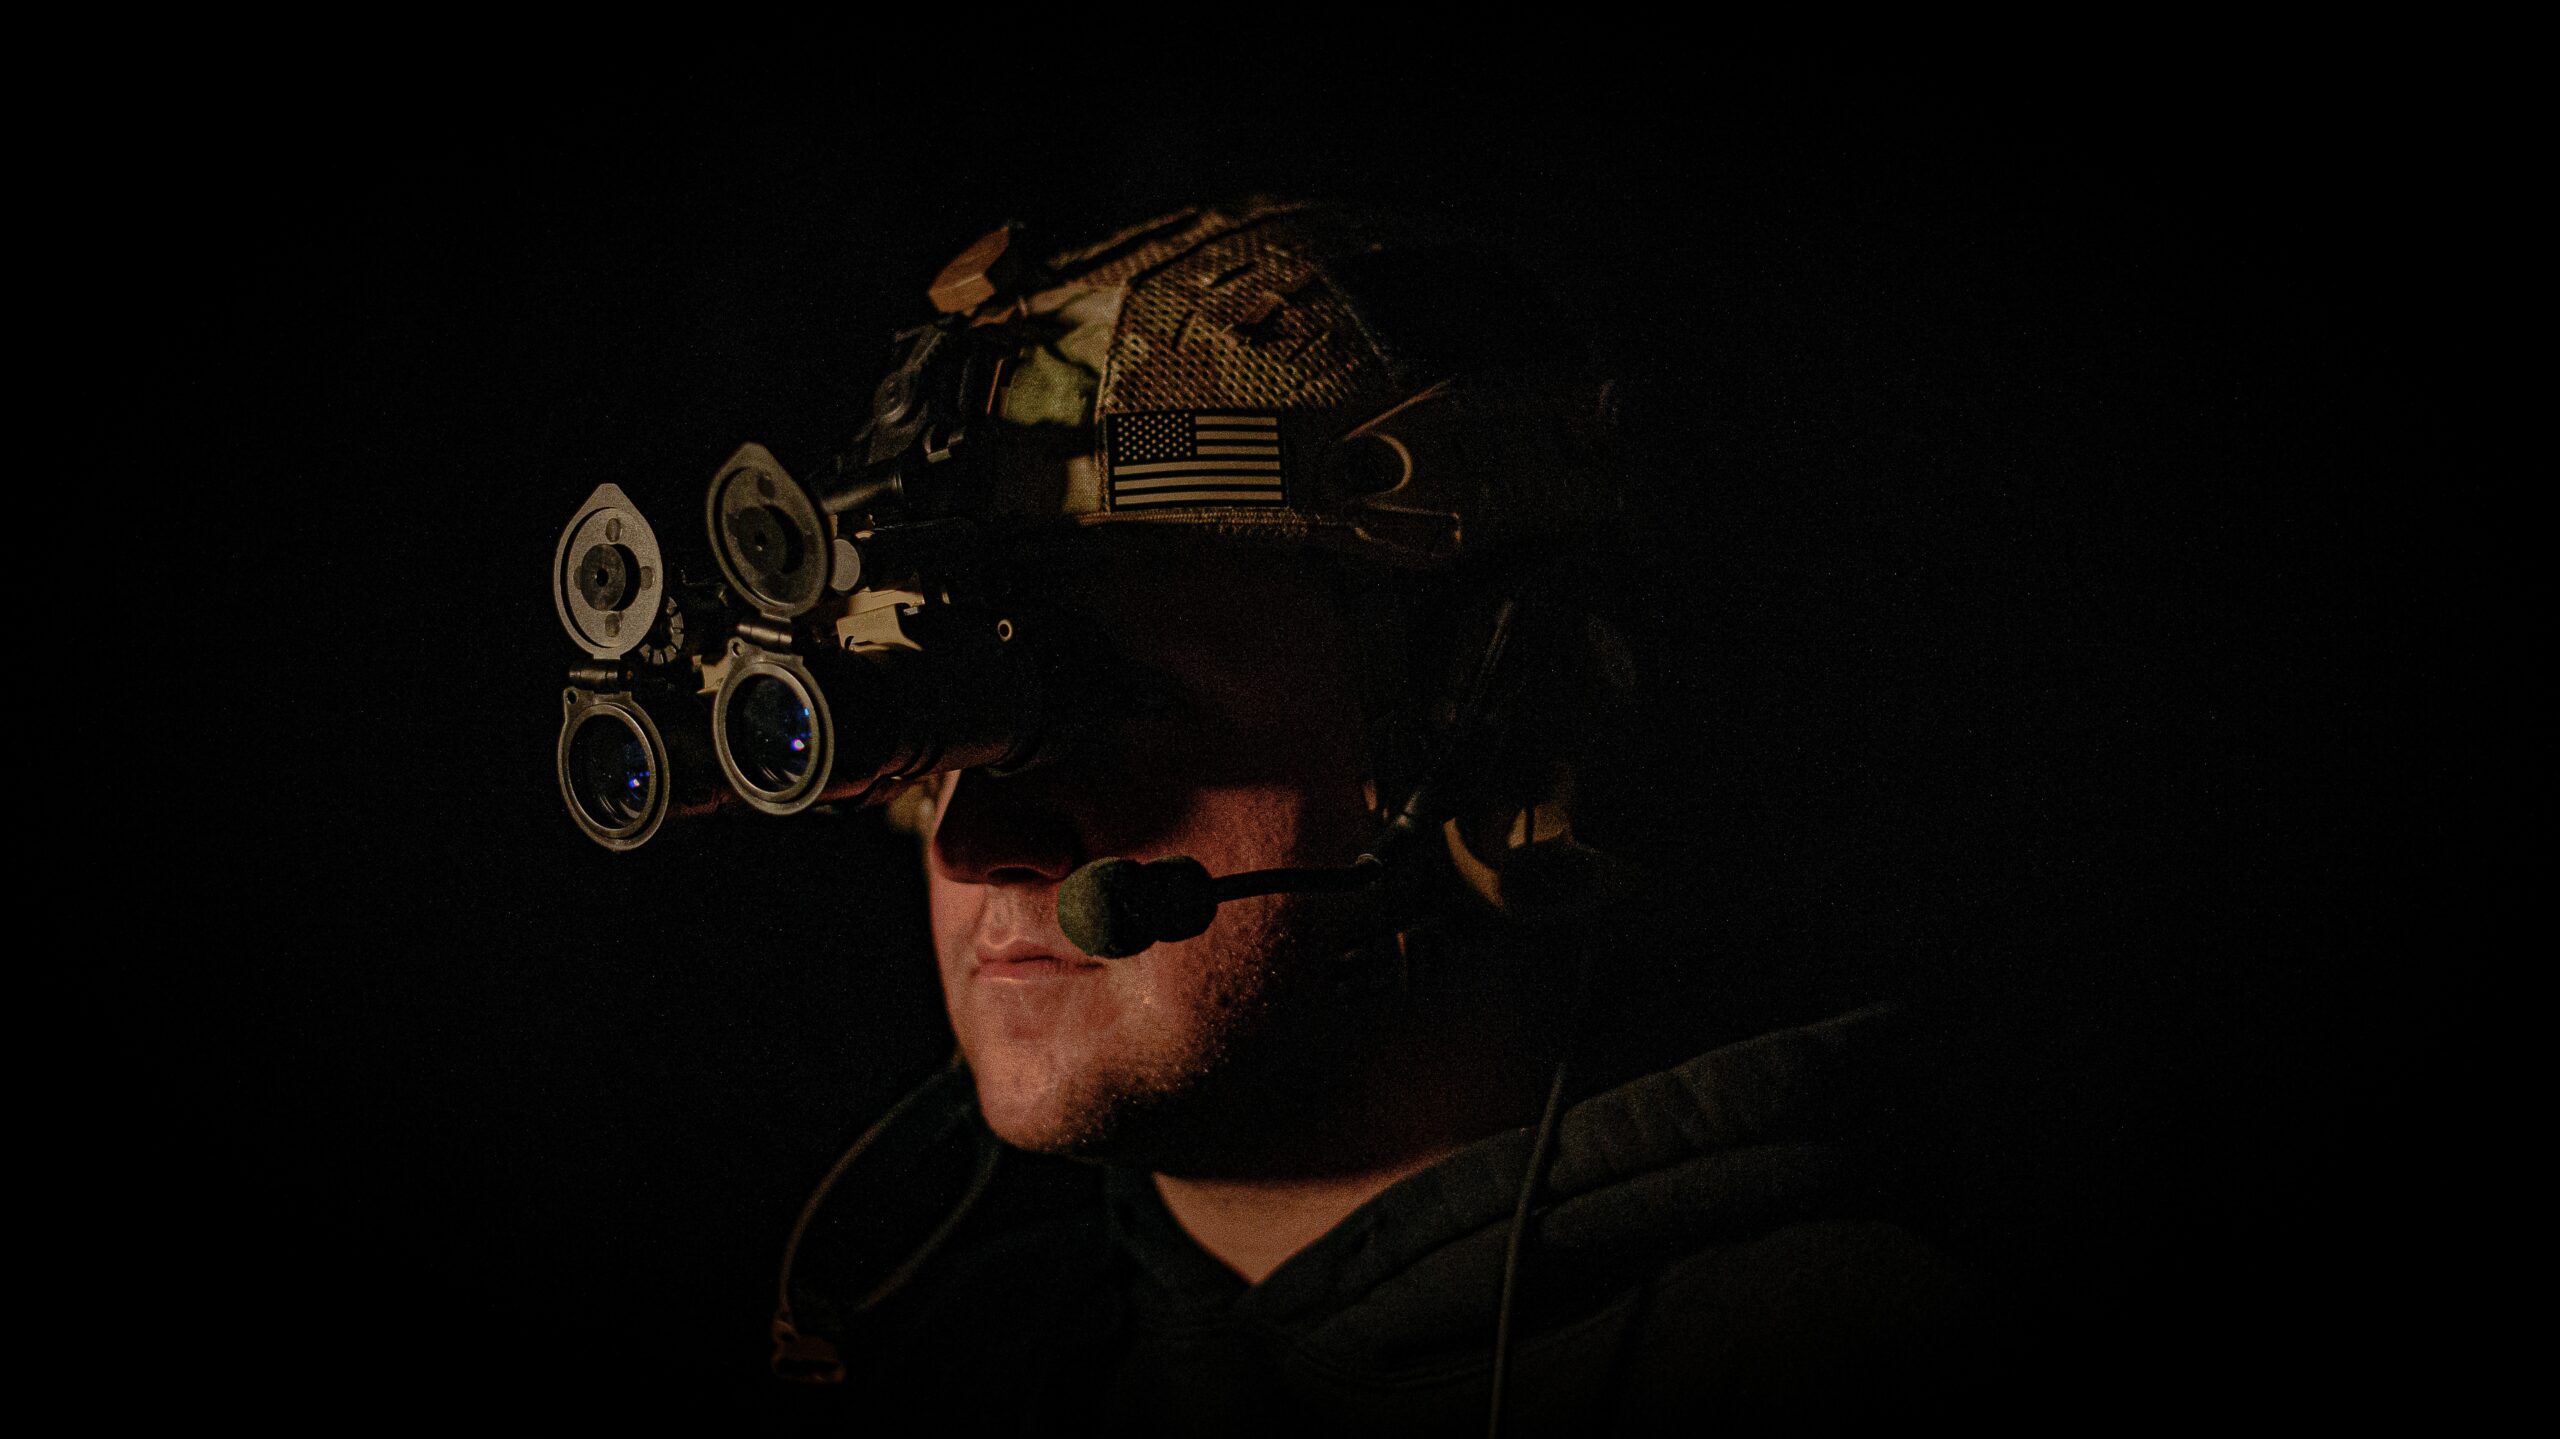 night vision goggles installed on a helmet